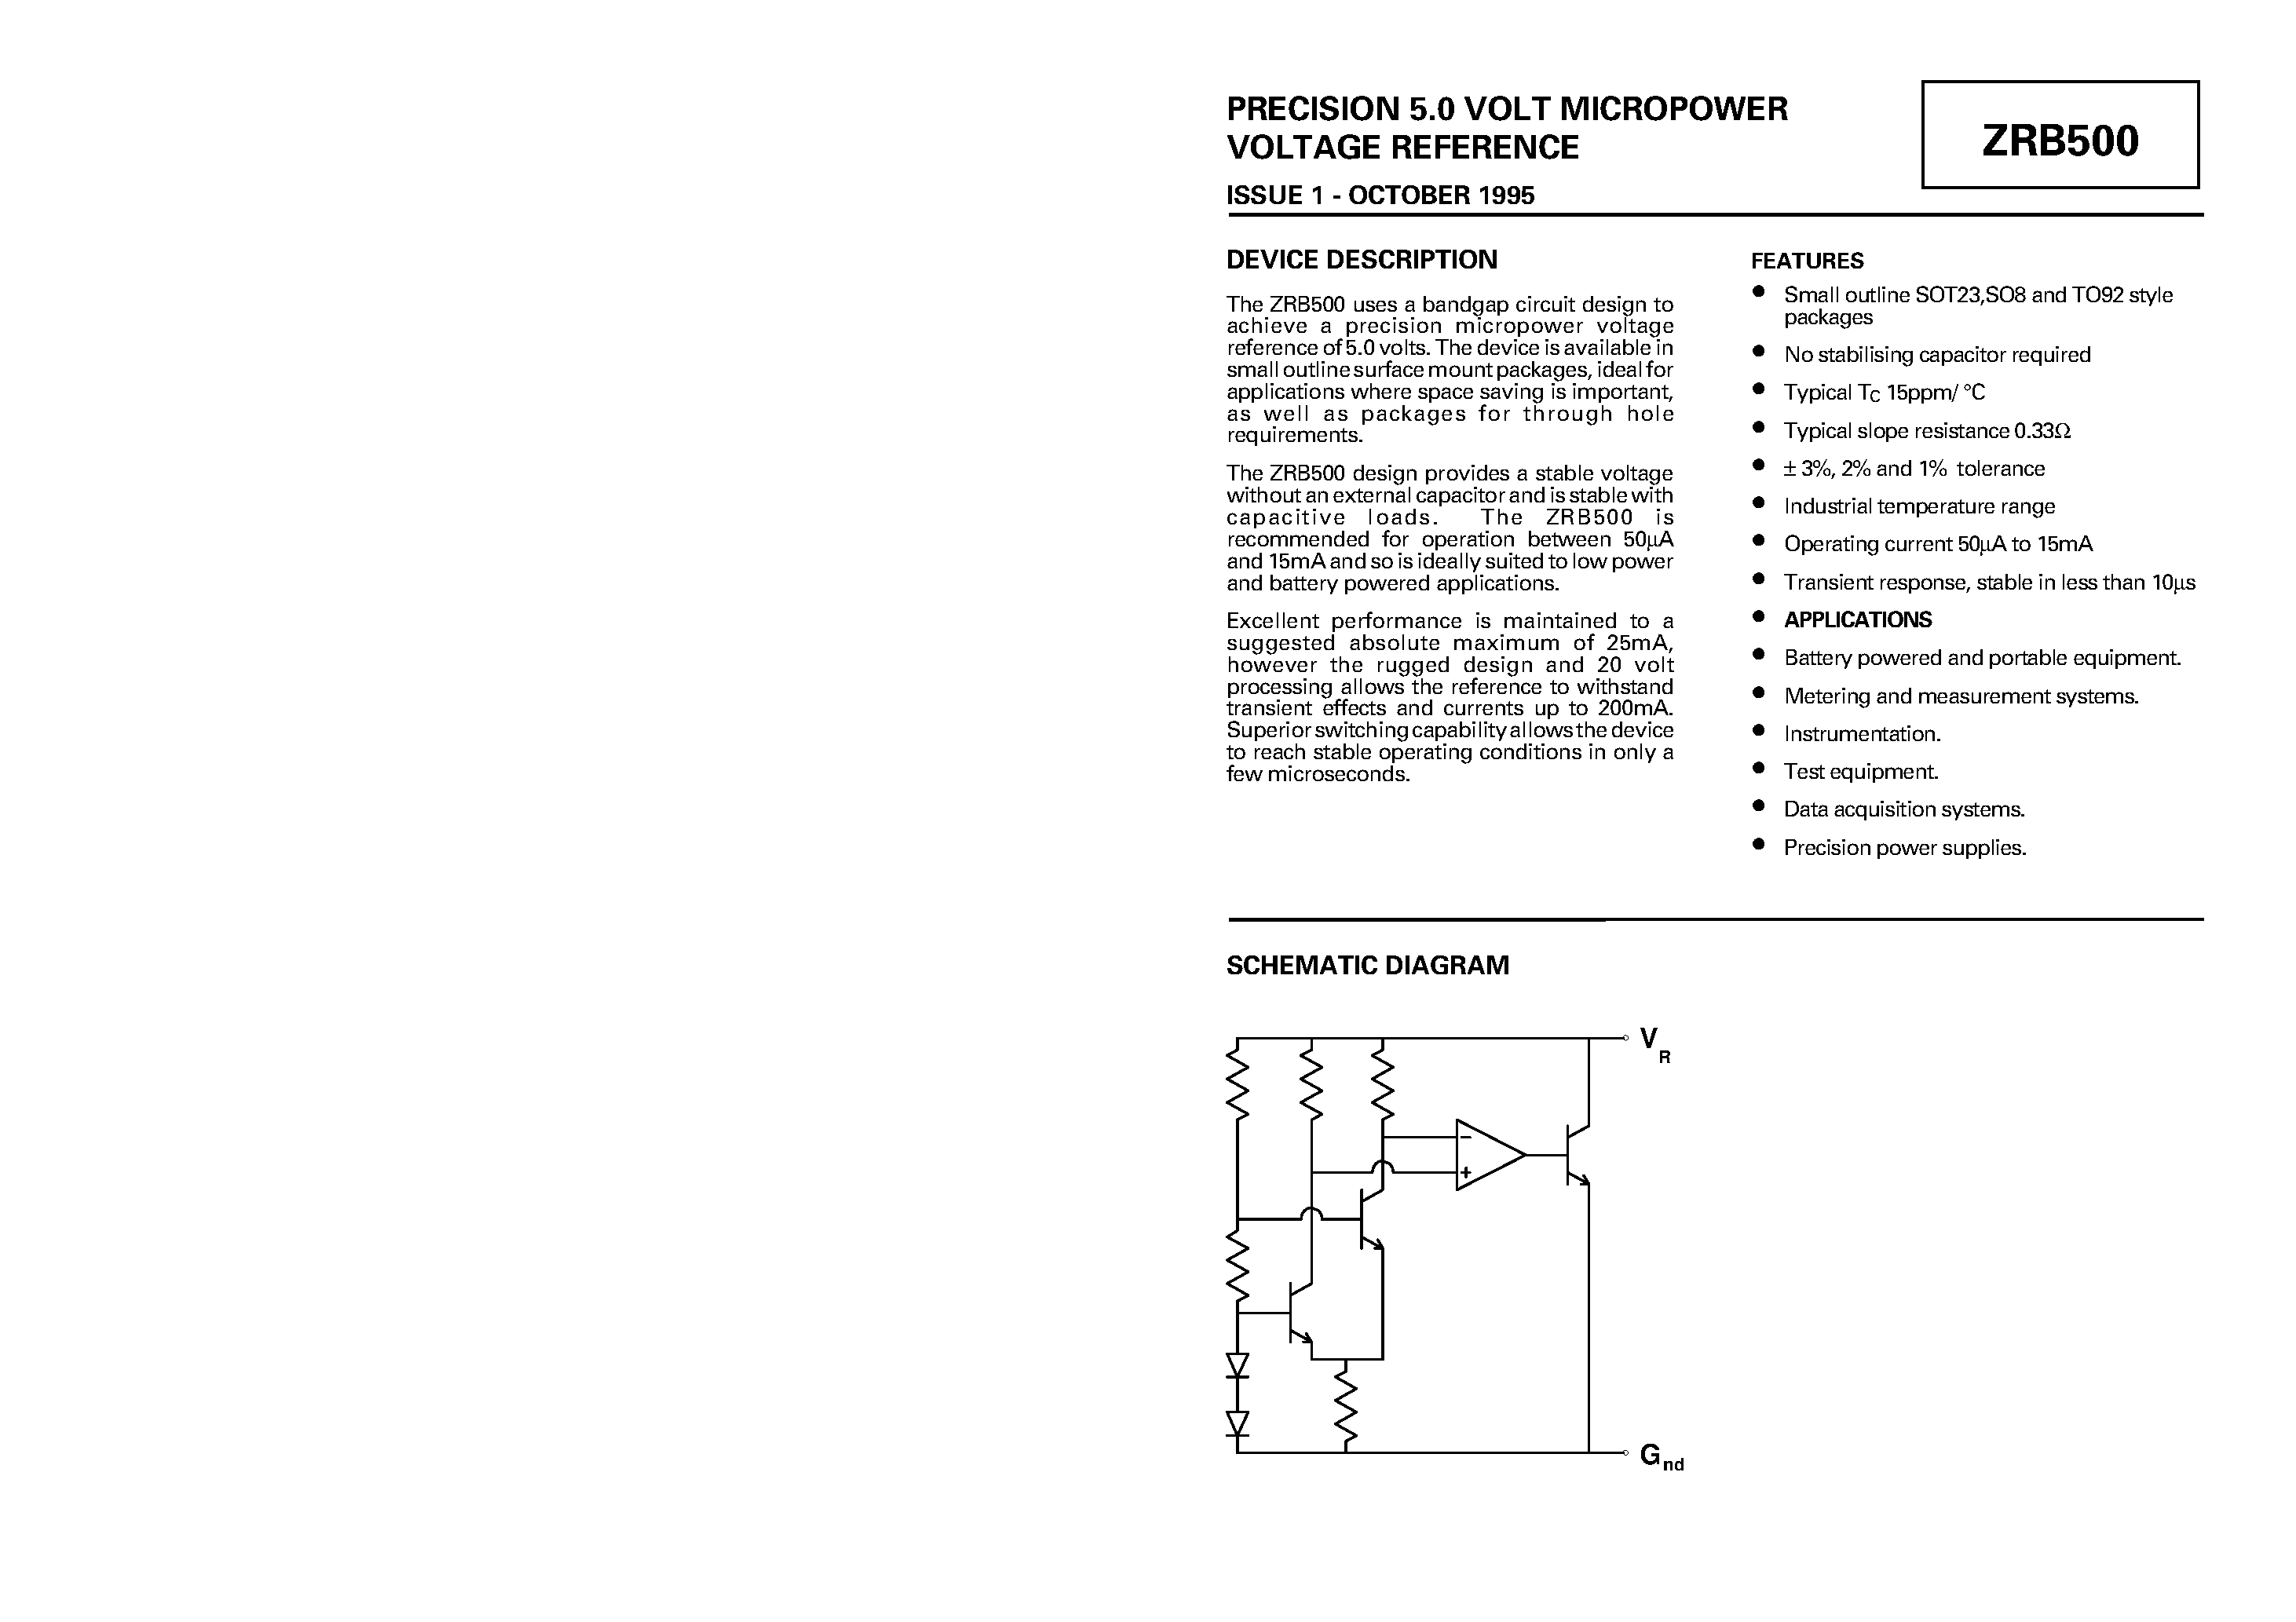 Datasheet ZRB500F02 - PRECISION 5.0 VOLT MICROPOWER VOLTAGE REFERENCE page 1